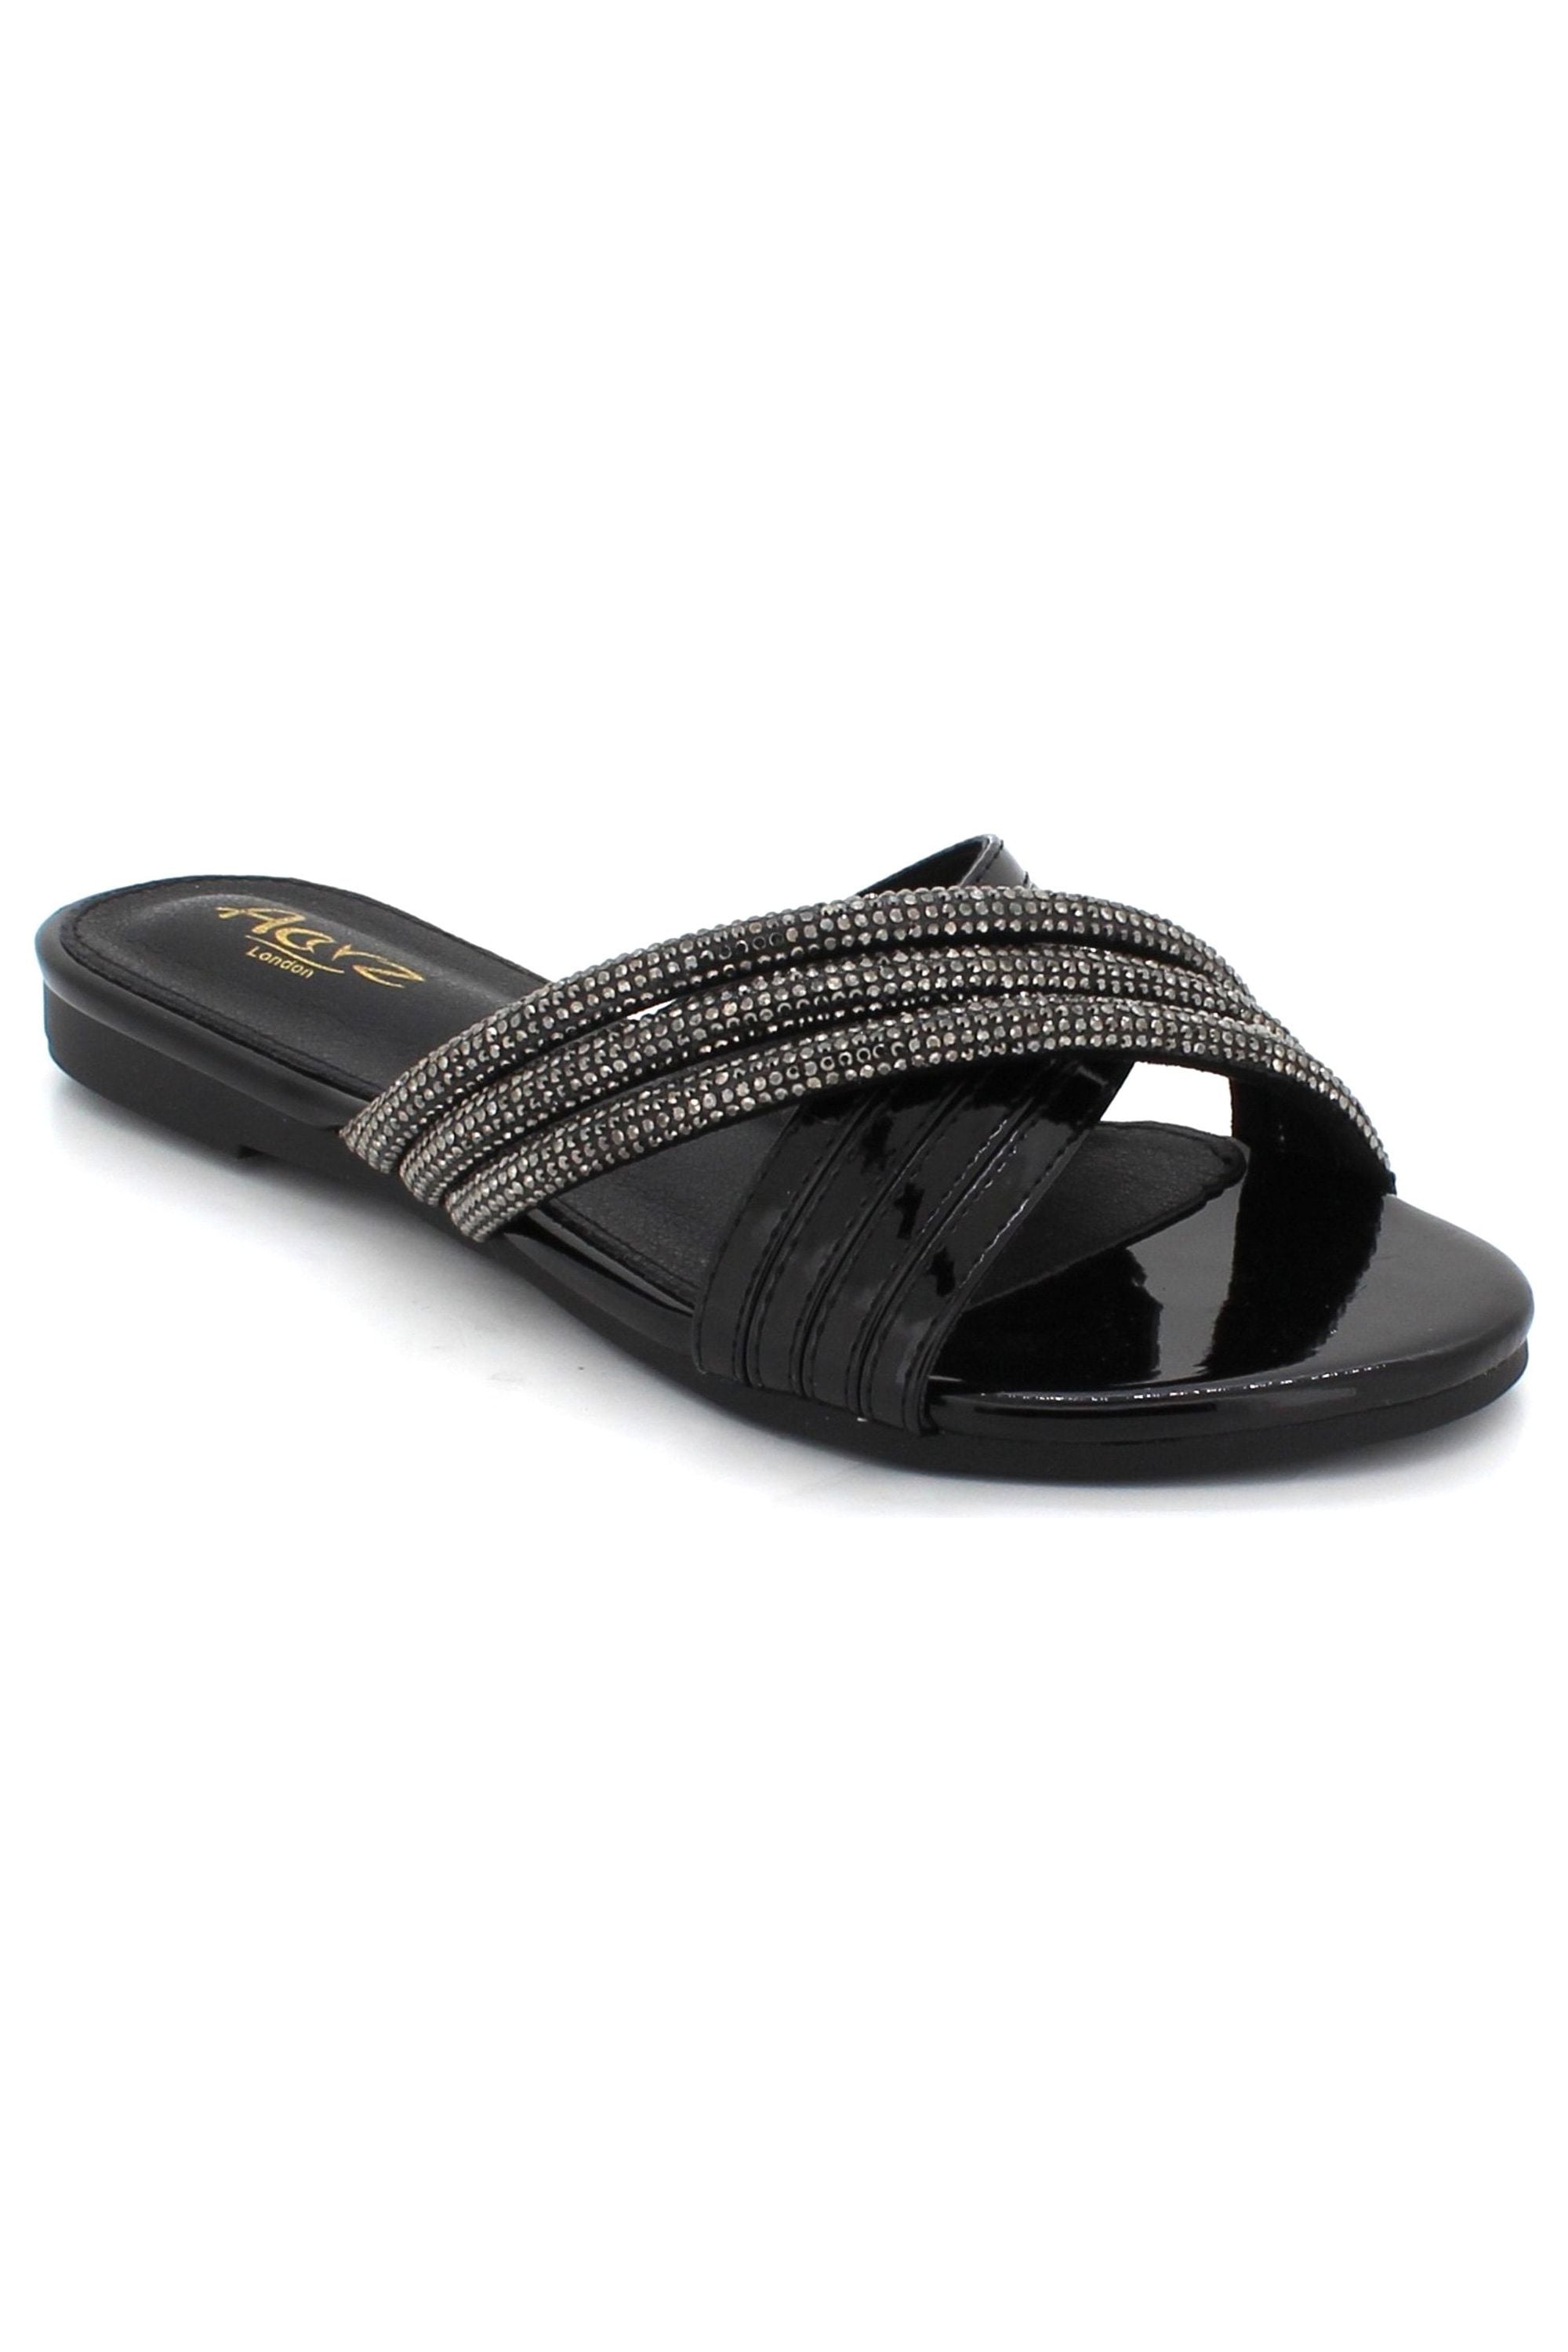 Fashionable Cross-strap Open Toe Party Holiday Summer Beach Casual Comfort Flat L7592